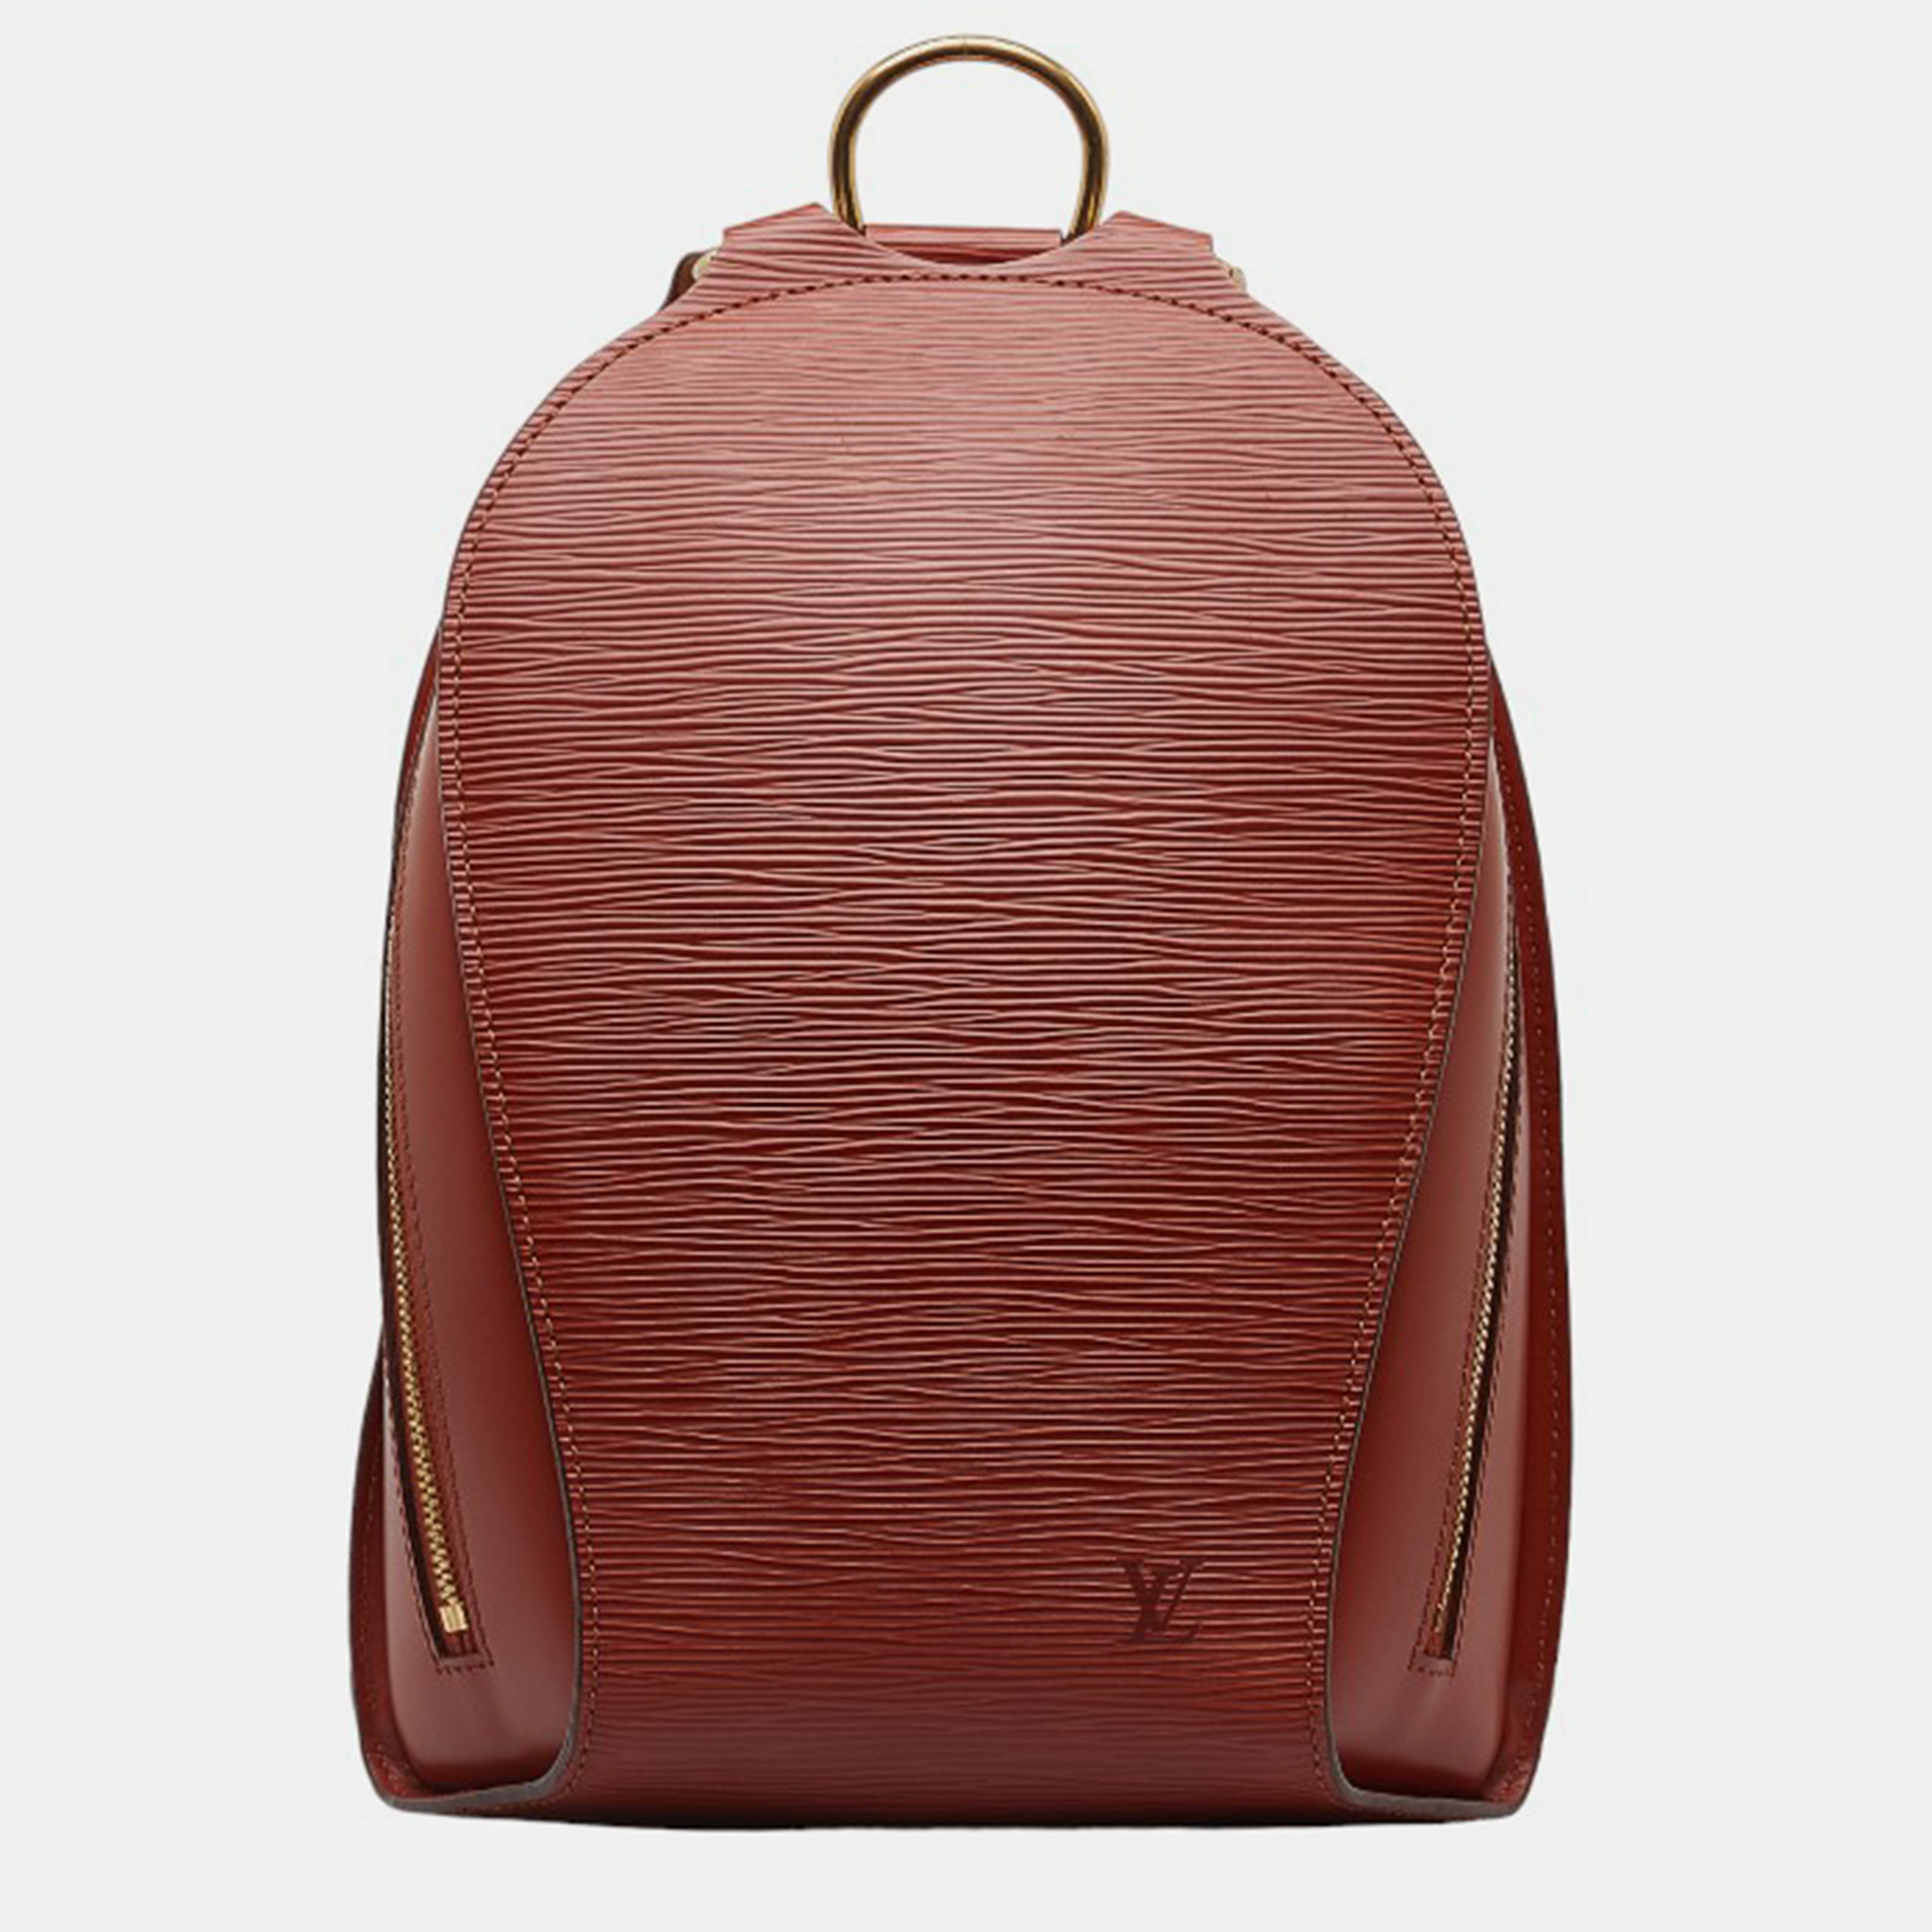 Louis vuitton brown epi leather mabillon backpack